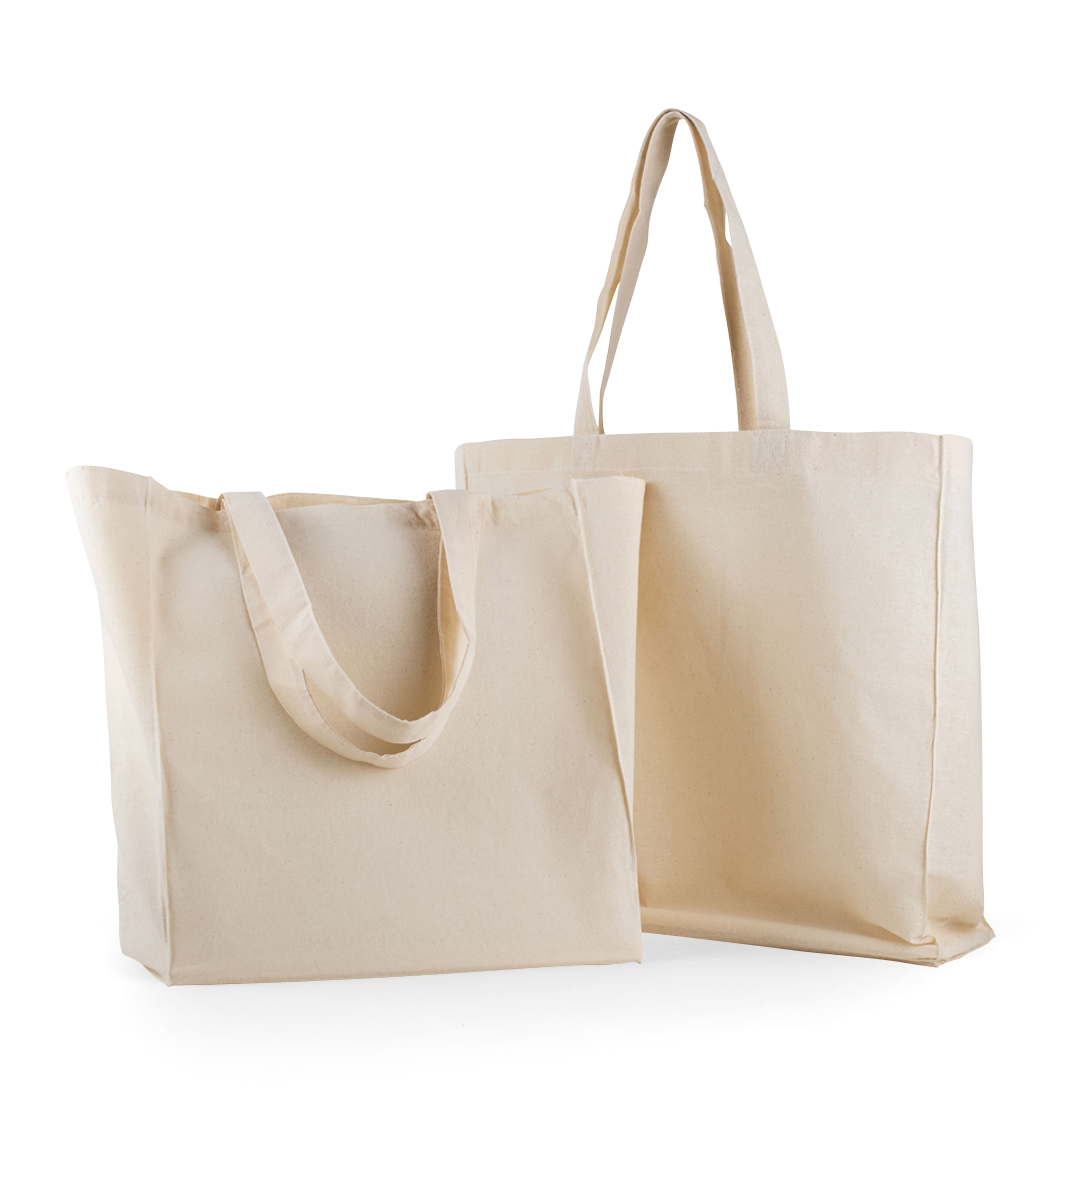 Calico Bags - Sydney Packaging